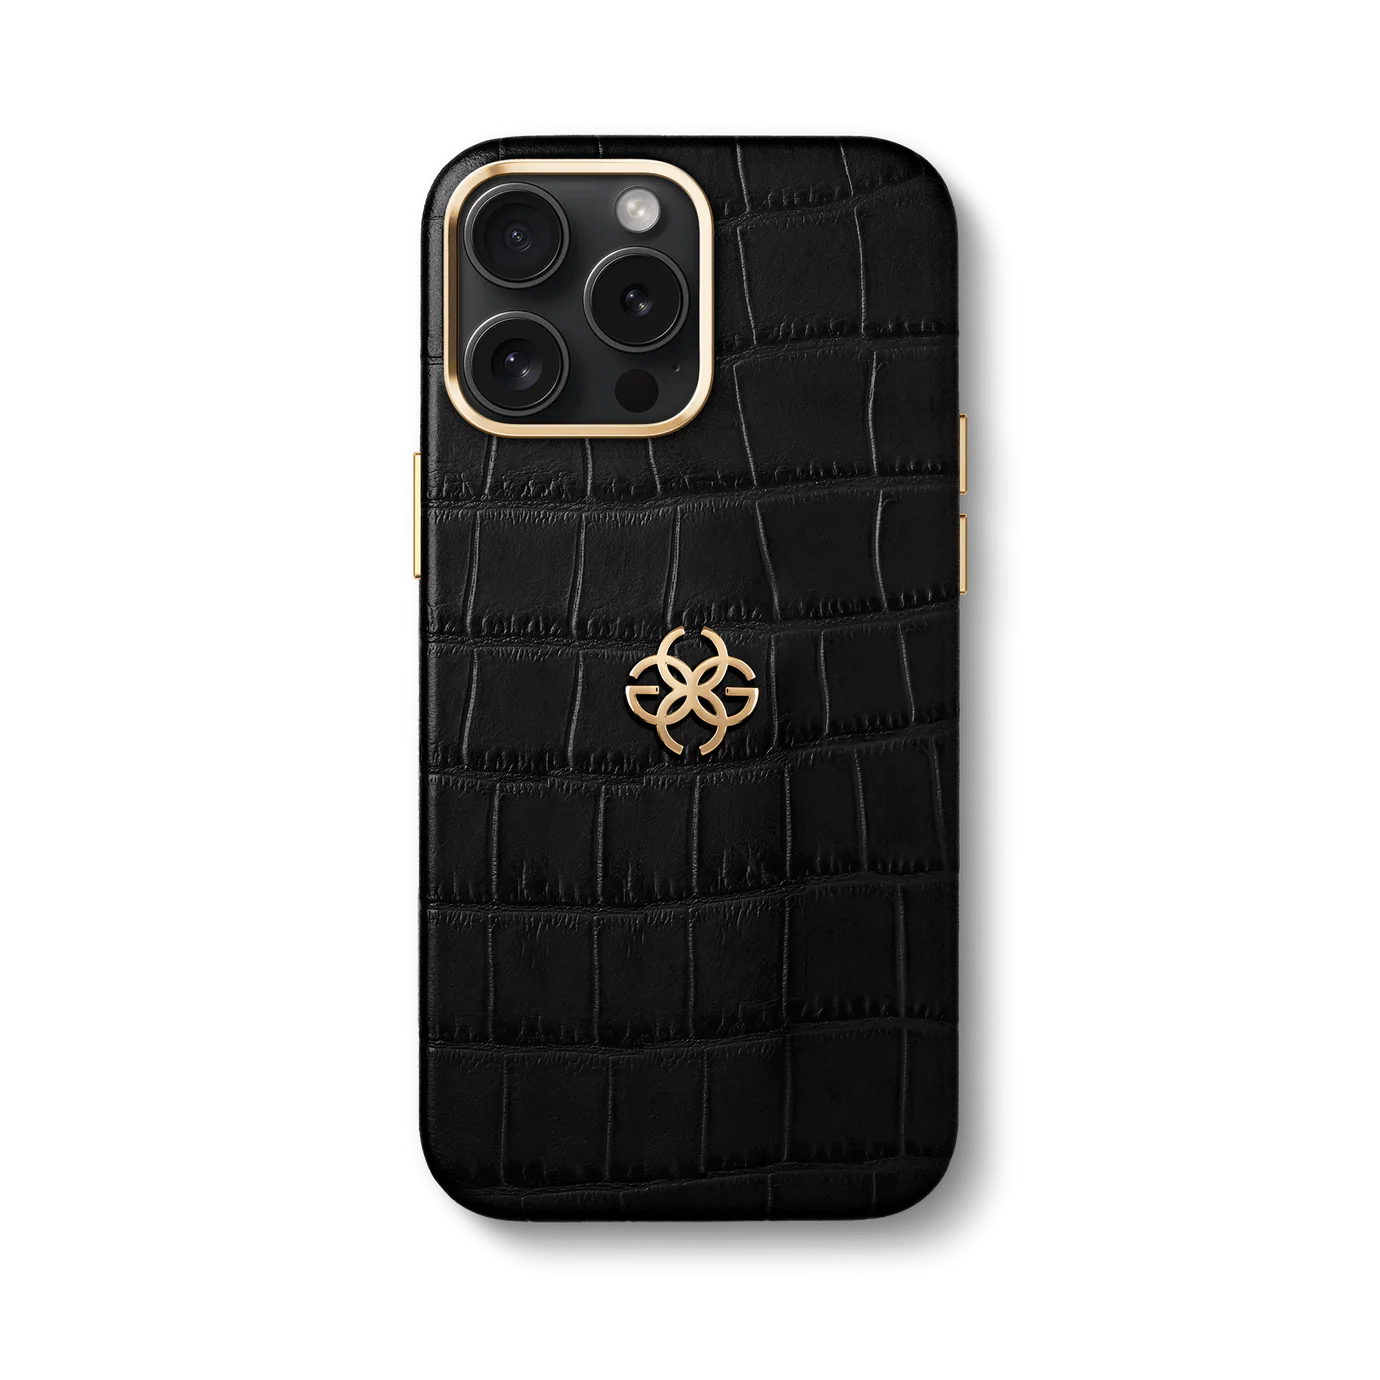 14 Pro/max Leather Cases